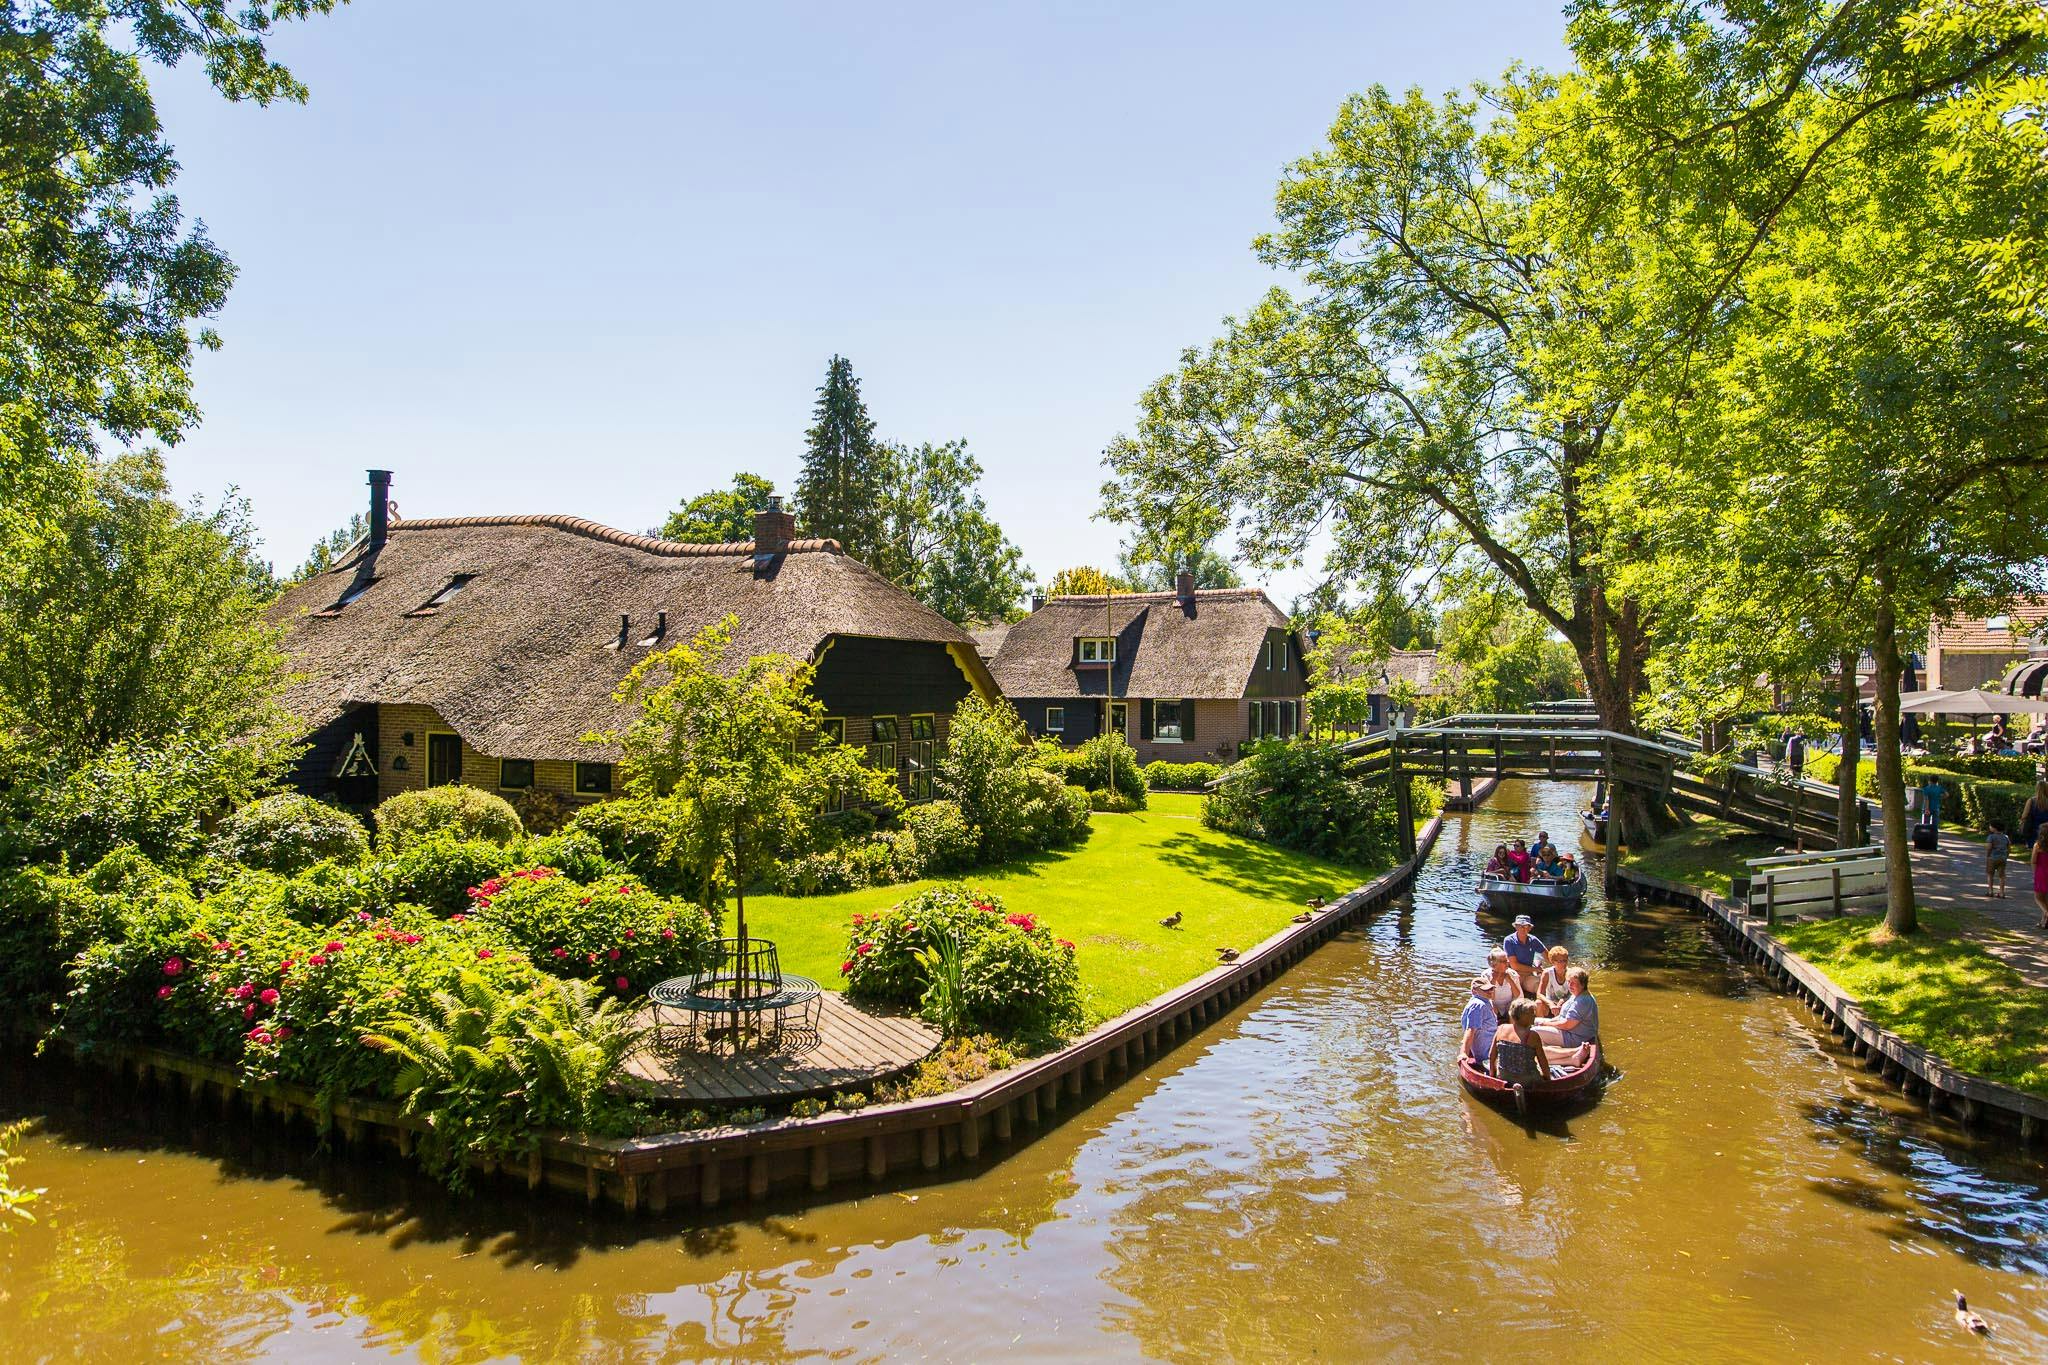 Giethoorn day trip from Amsterdam